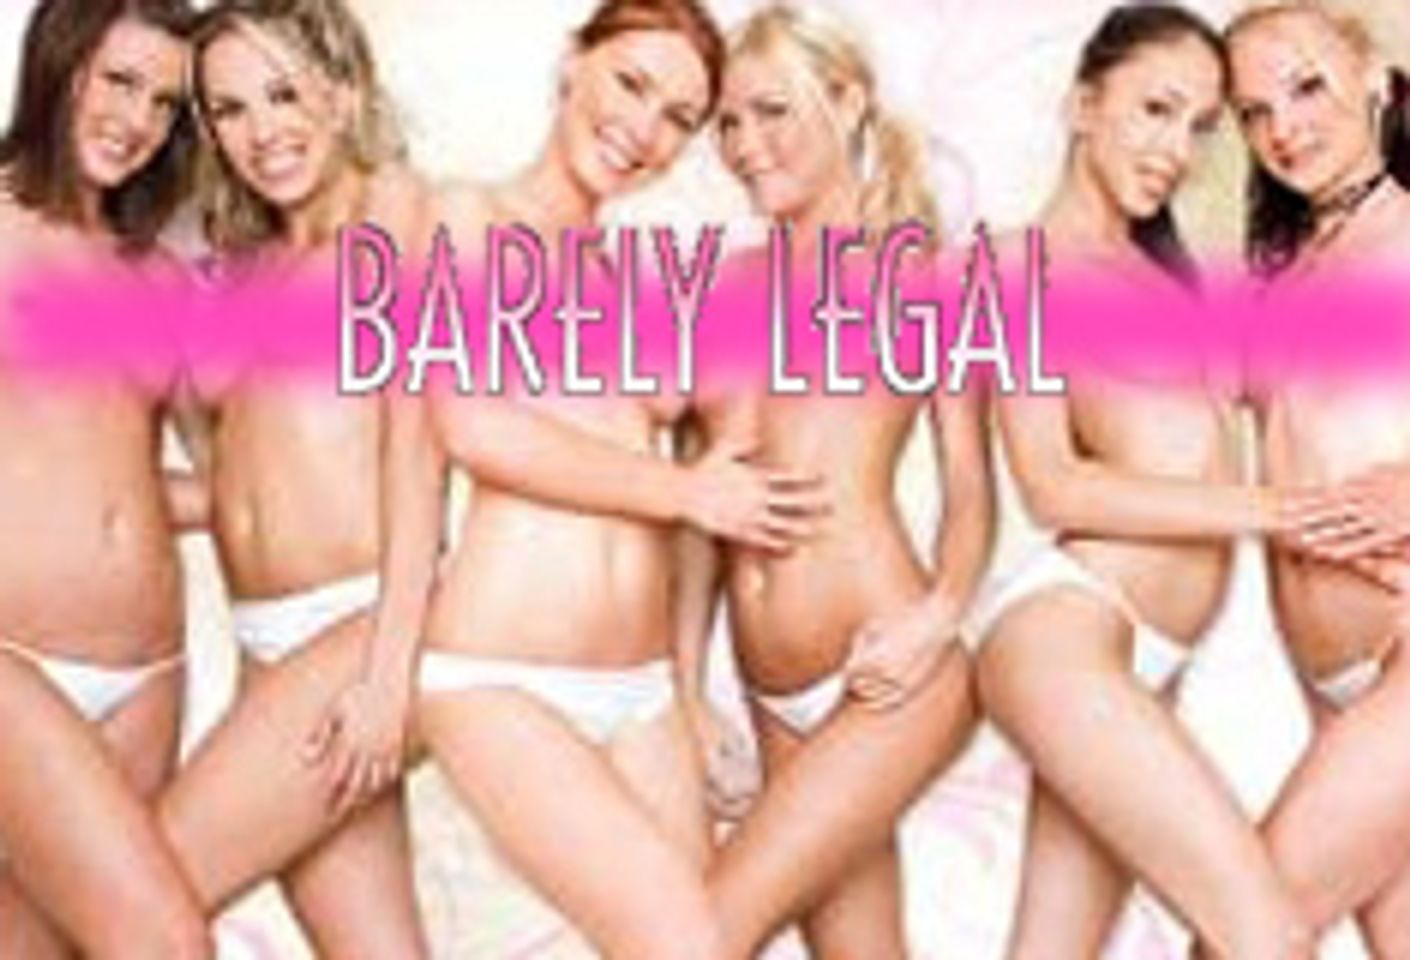 Barely Legal Girls to Sign at Hustler Hollywood